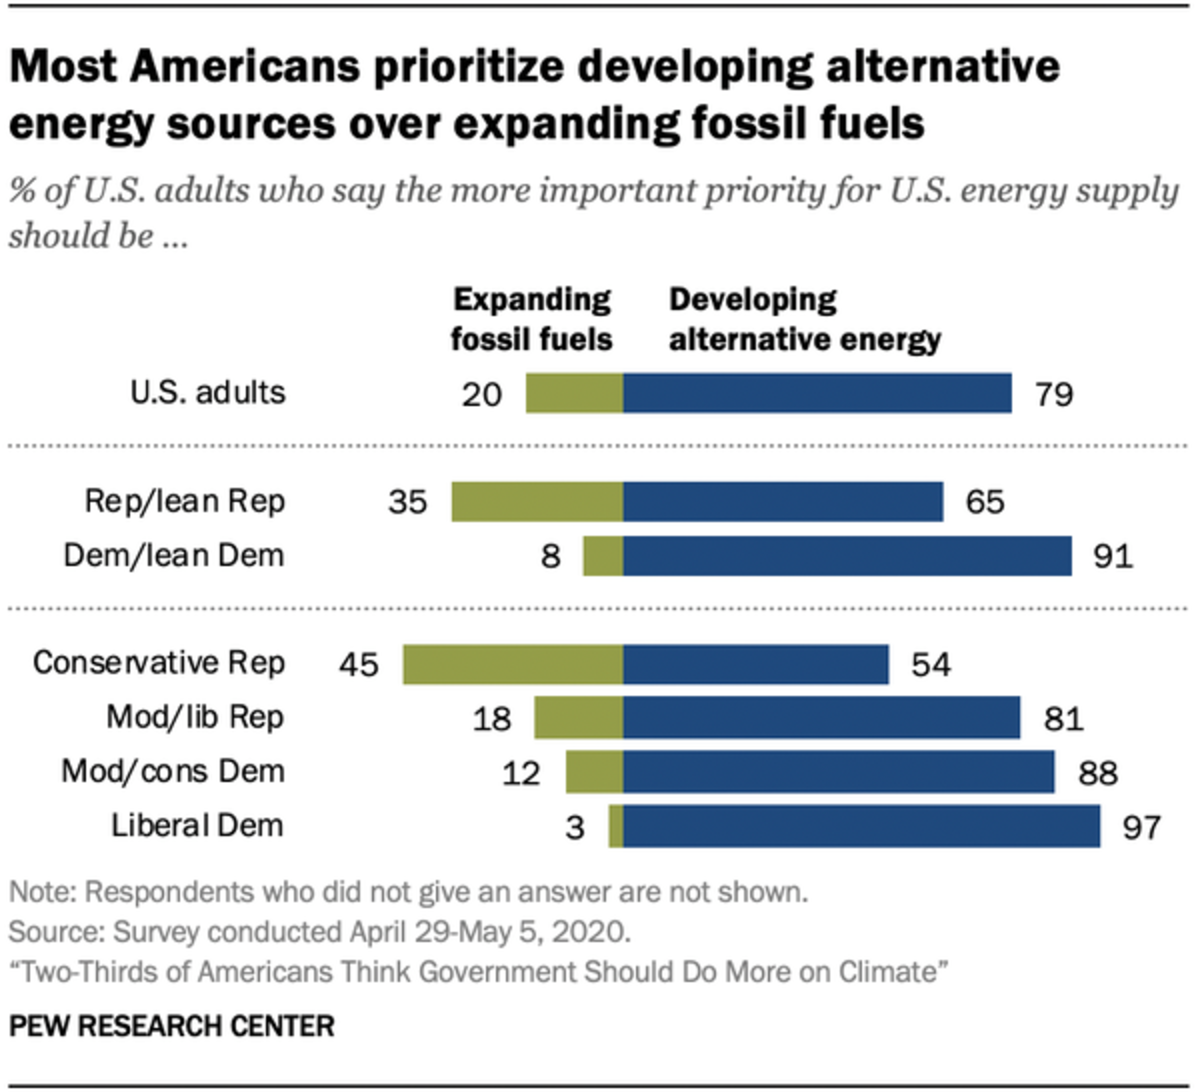 A majority of Americas of all political leanings believe the U.S. should develop alternative energy sources rather than expanding production of oil, coal and natural gas. Pew Research Center, CC BY-ND